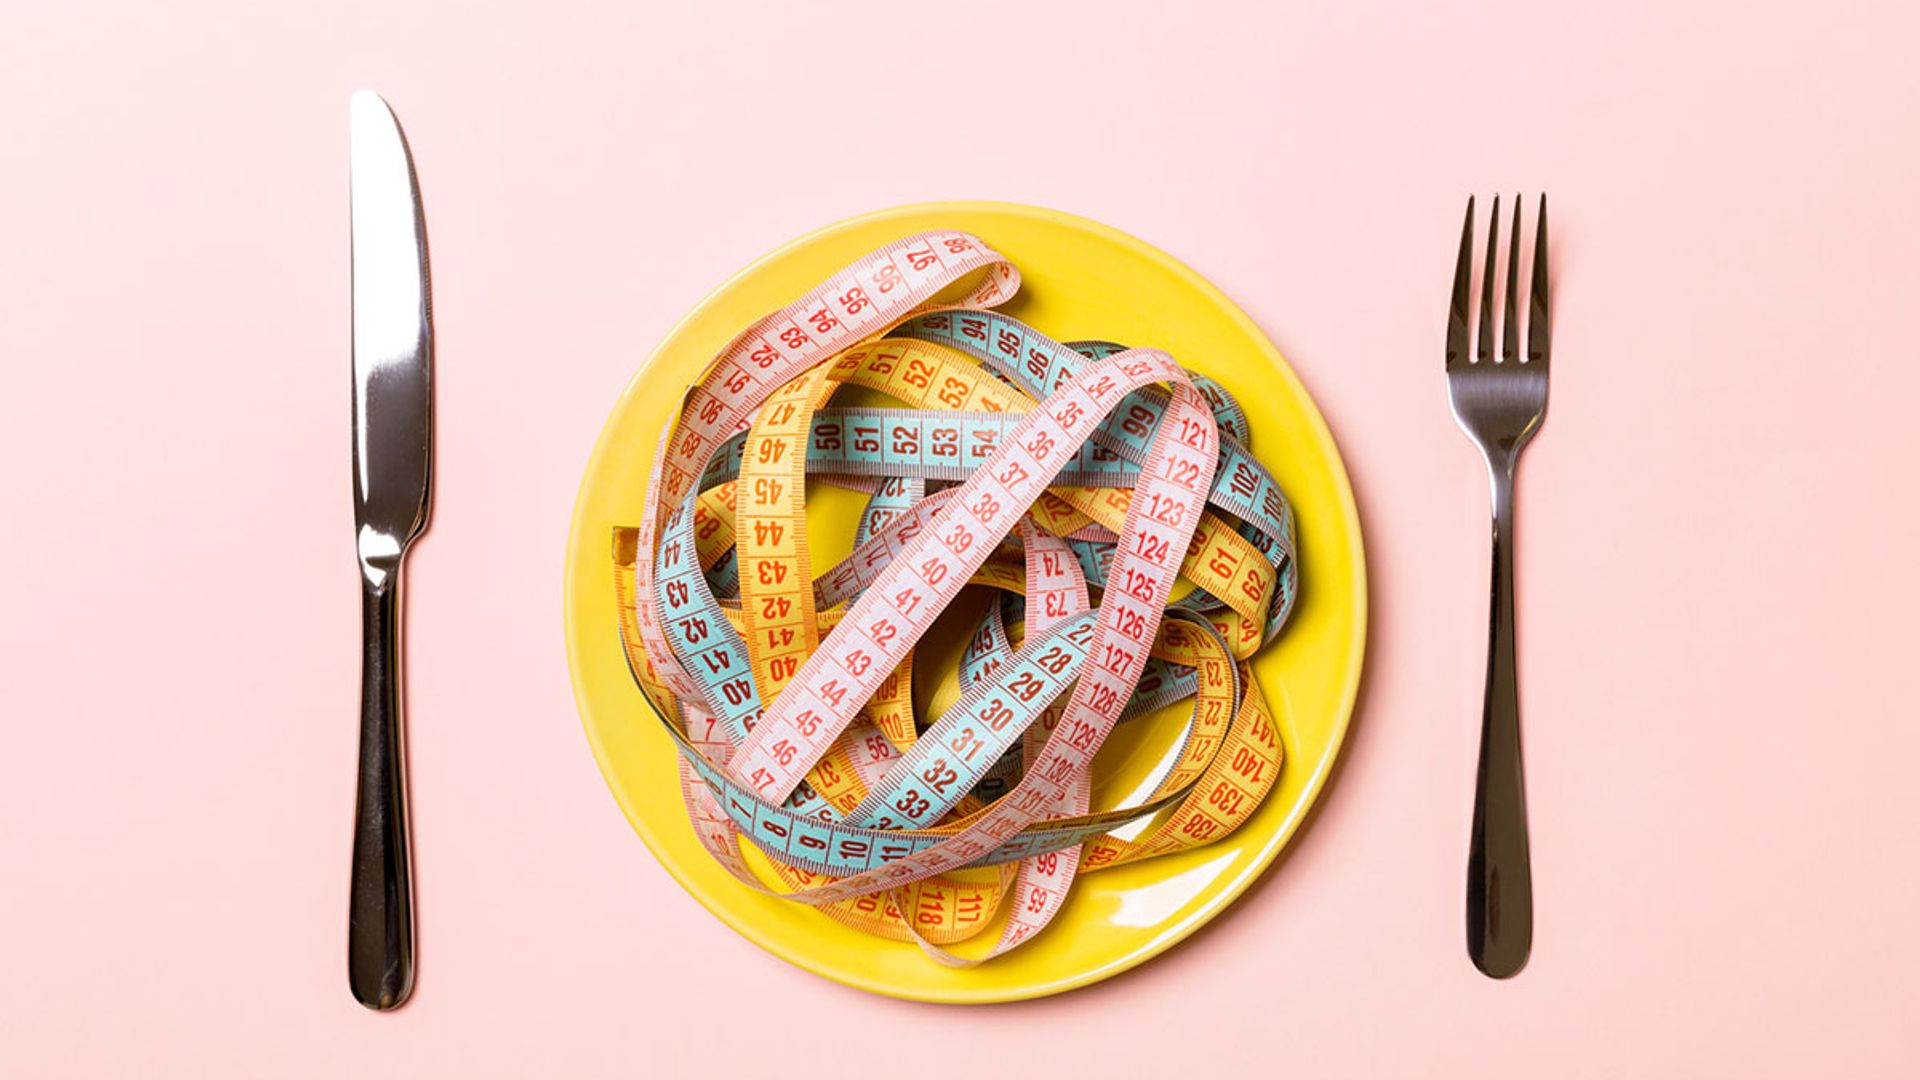 How to manage an eating disorder during self-isolation